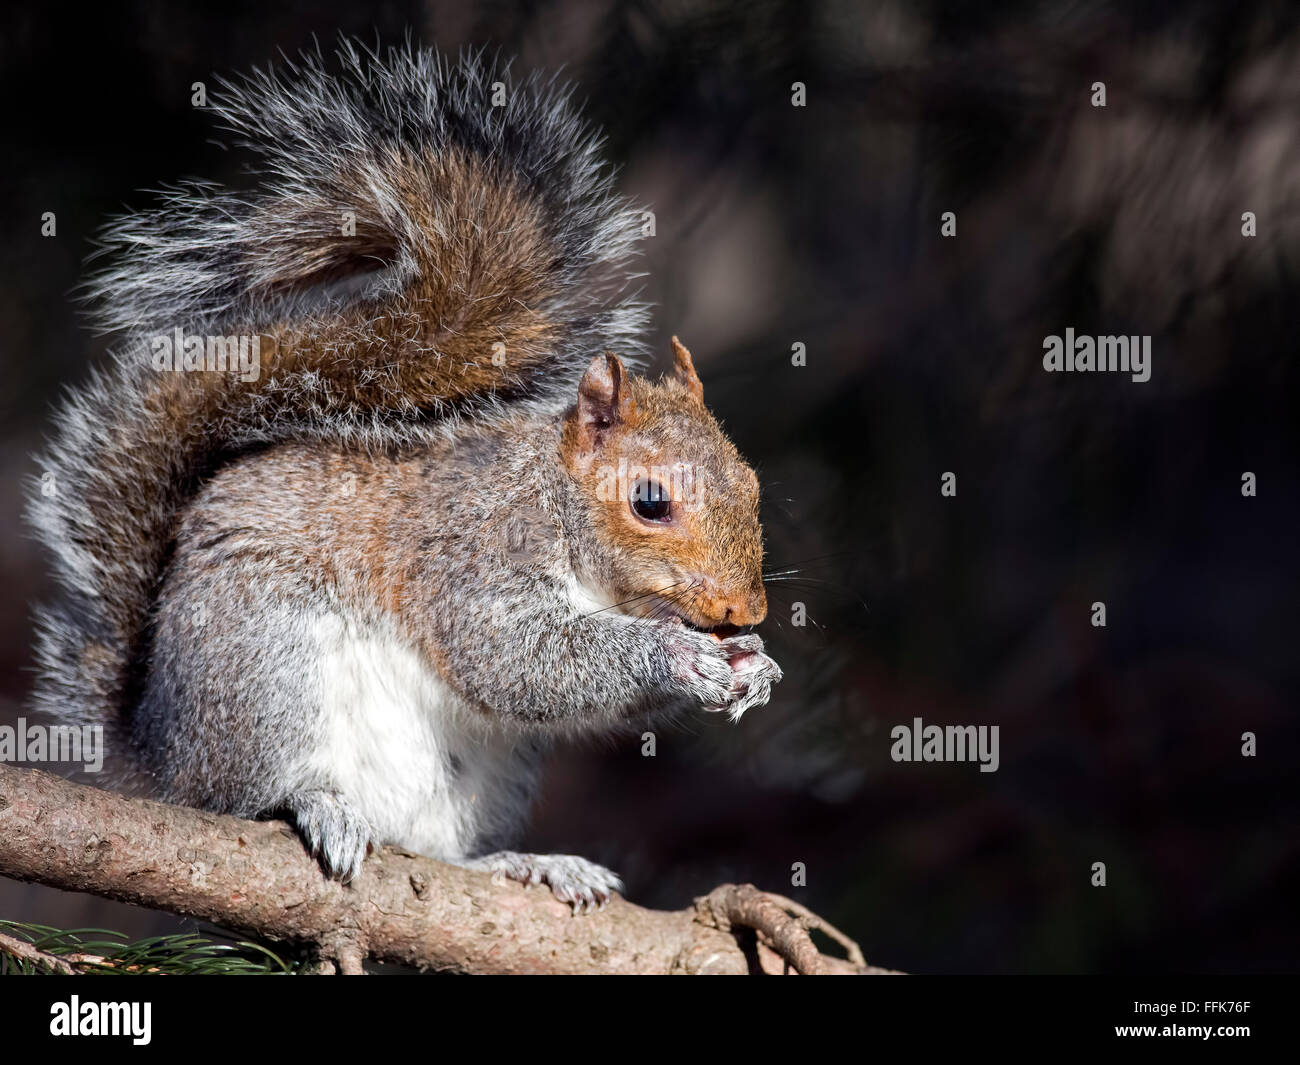 Eastern Gray Squirrel Eating nuts Stock Photo